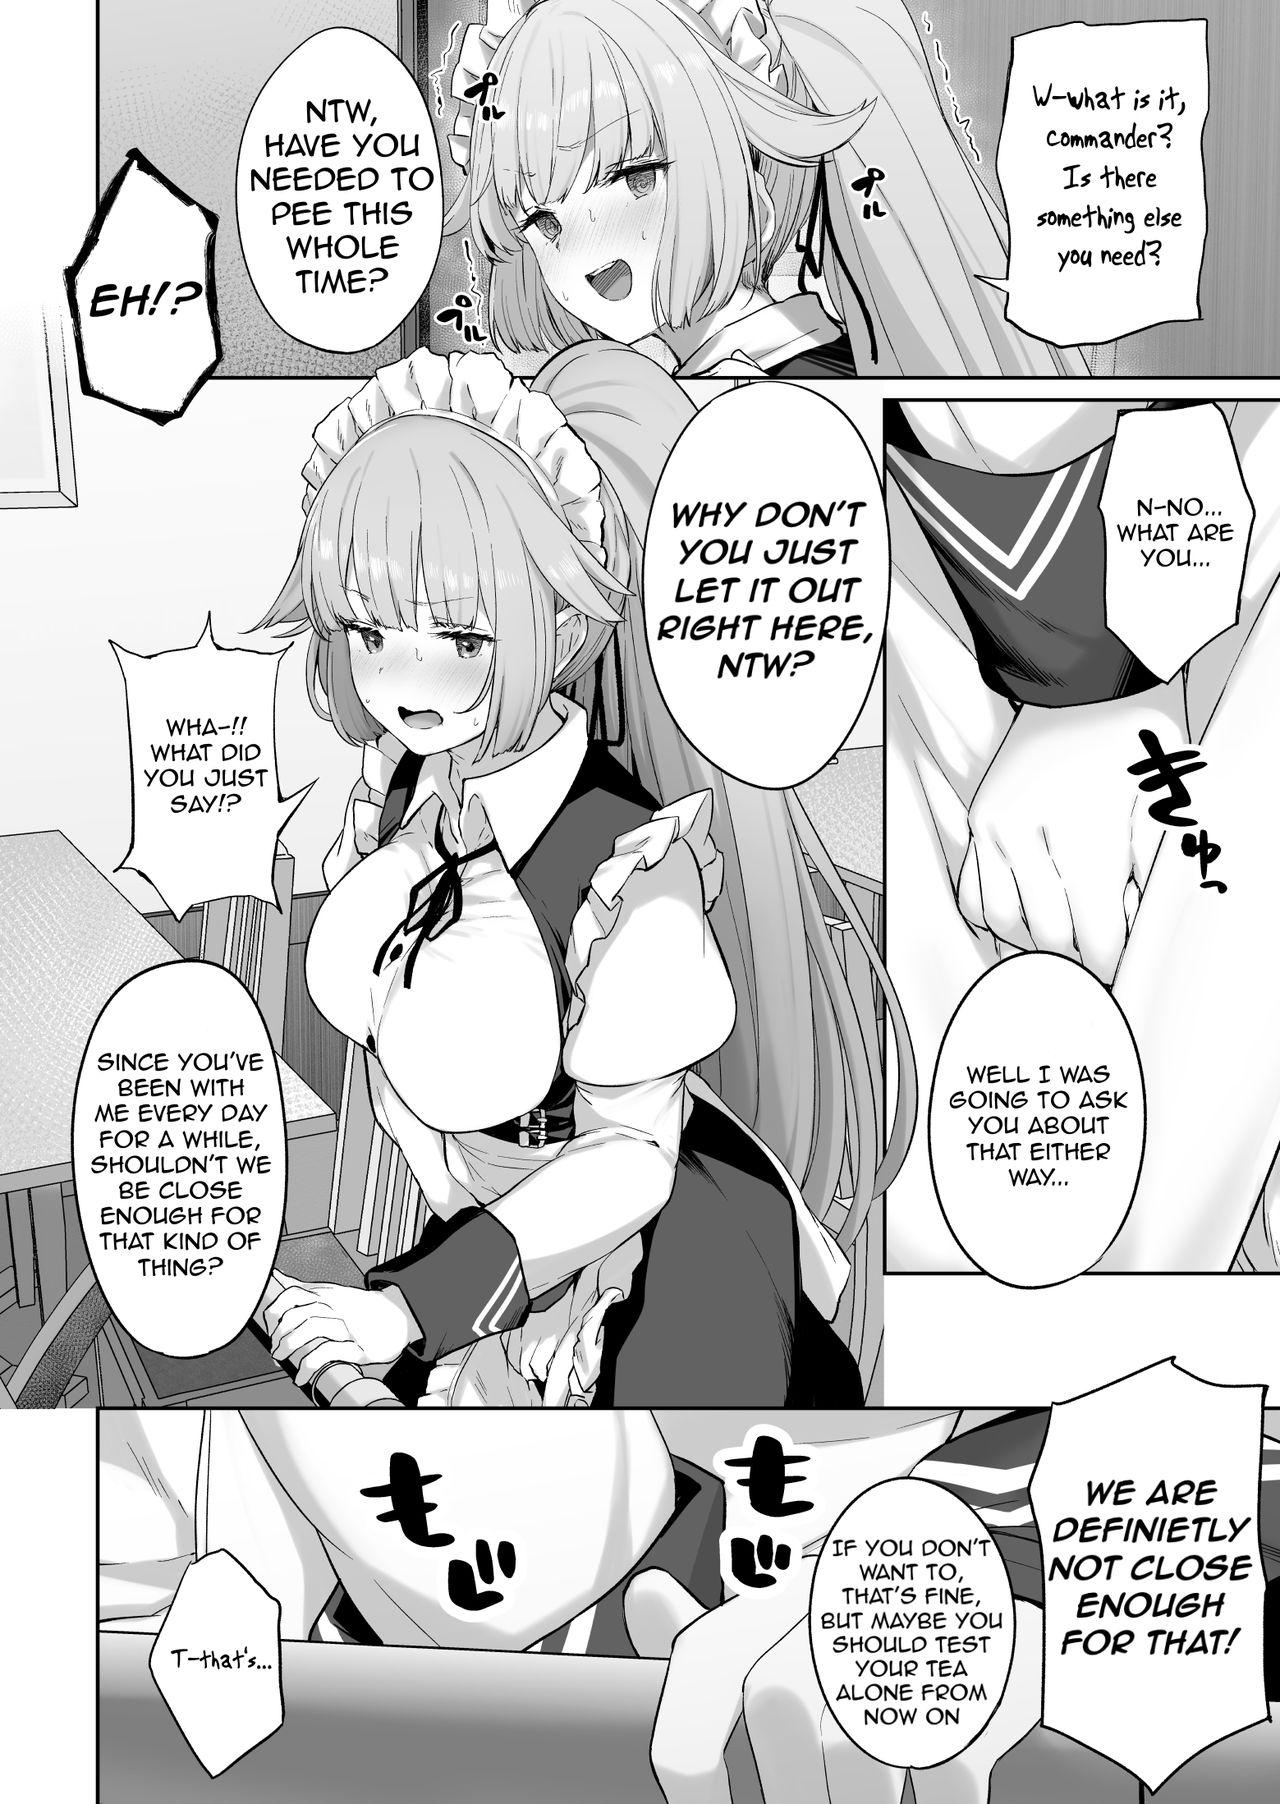 Sucking NTW-20 - Girls frontline Chacal - Page 2